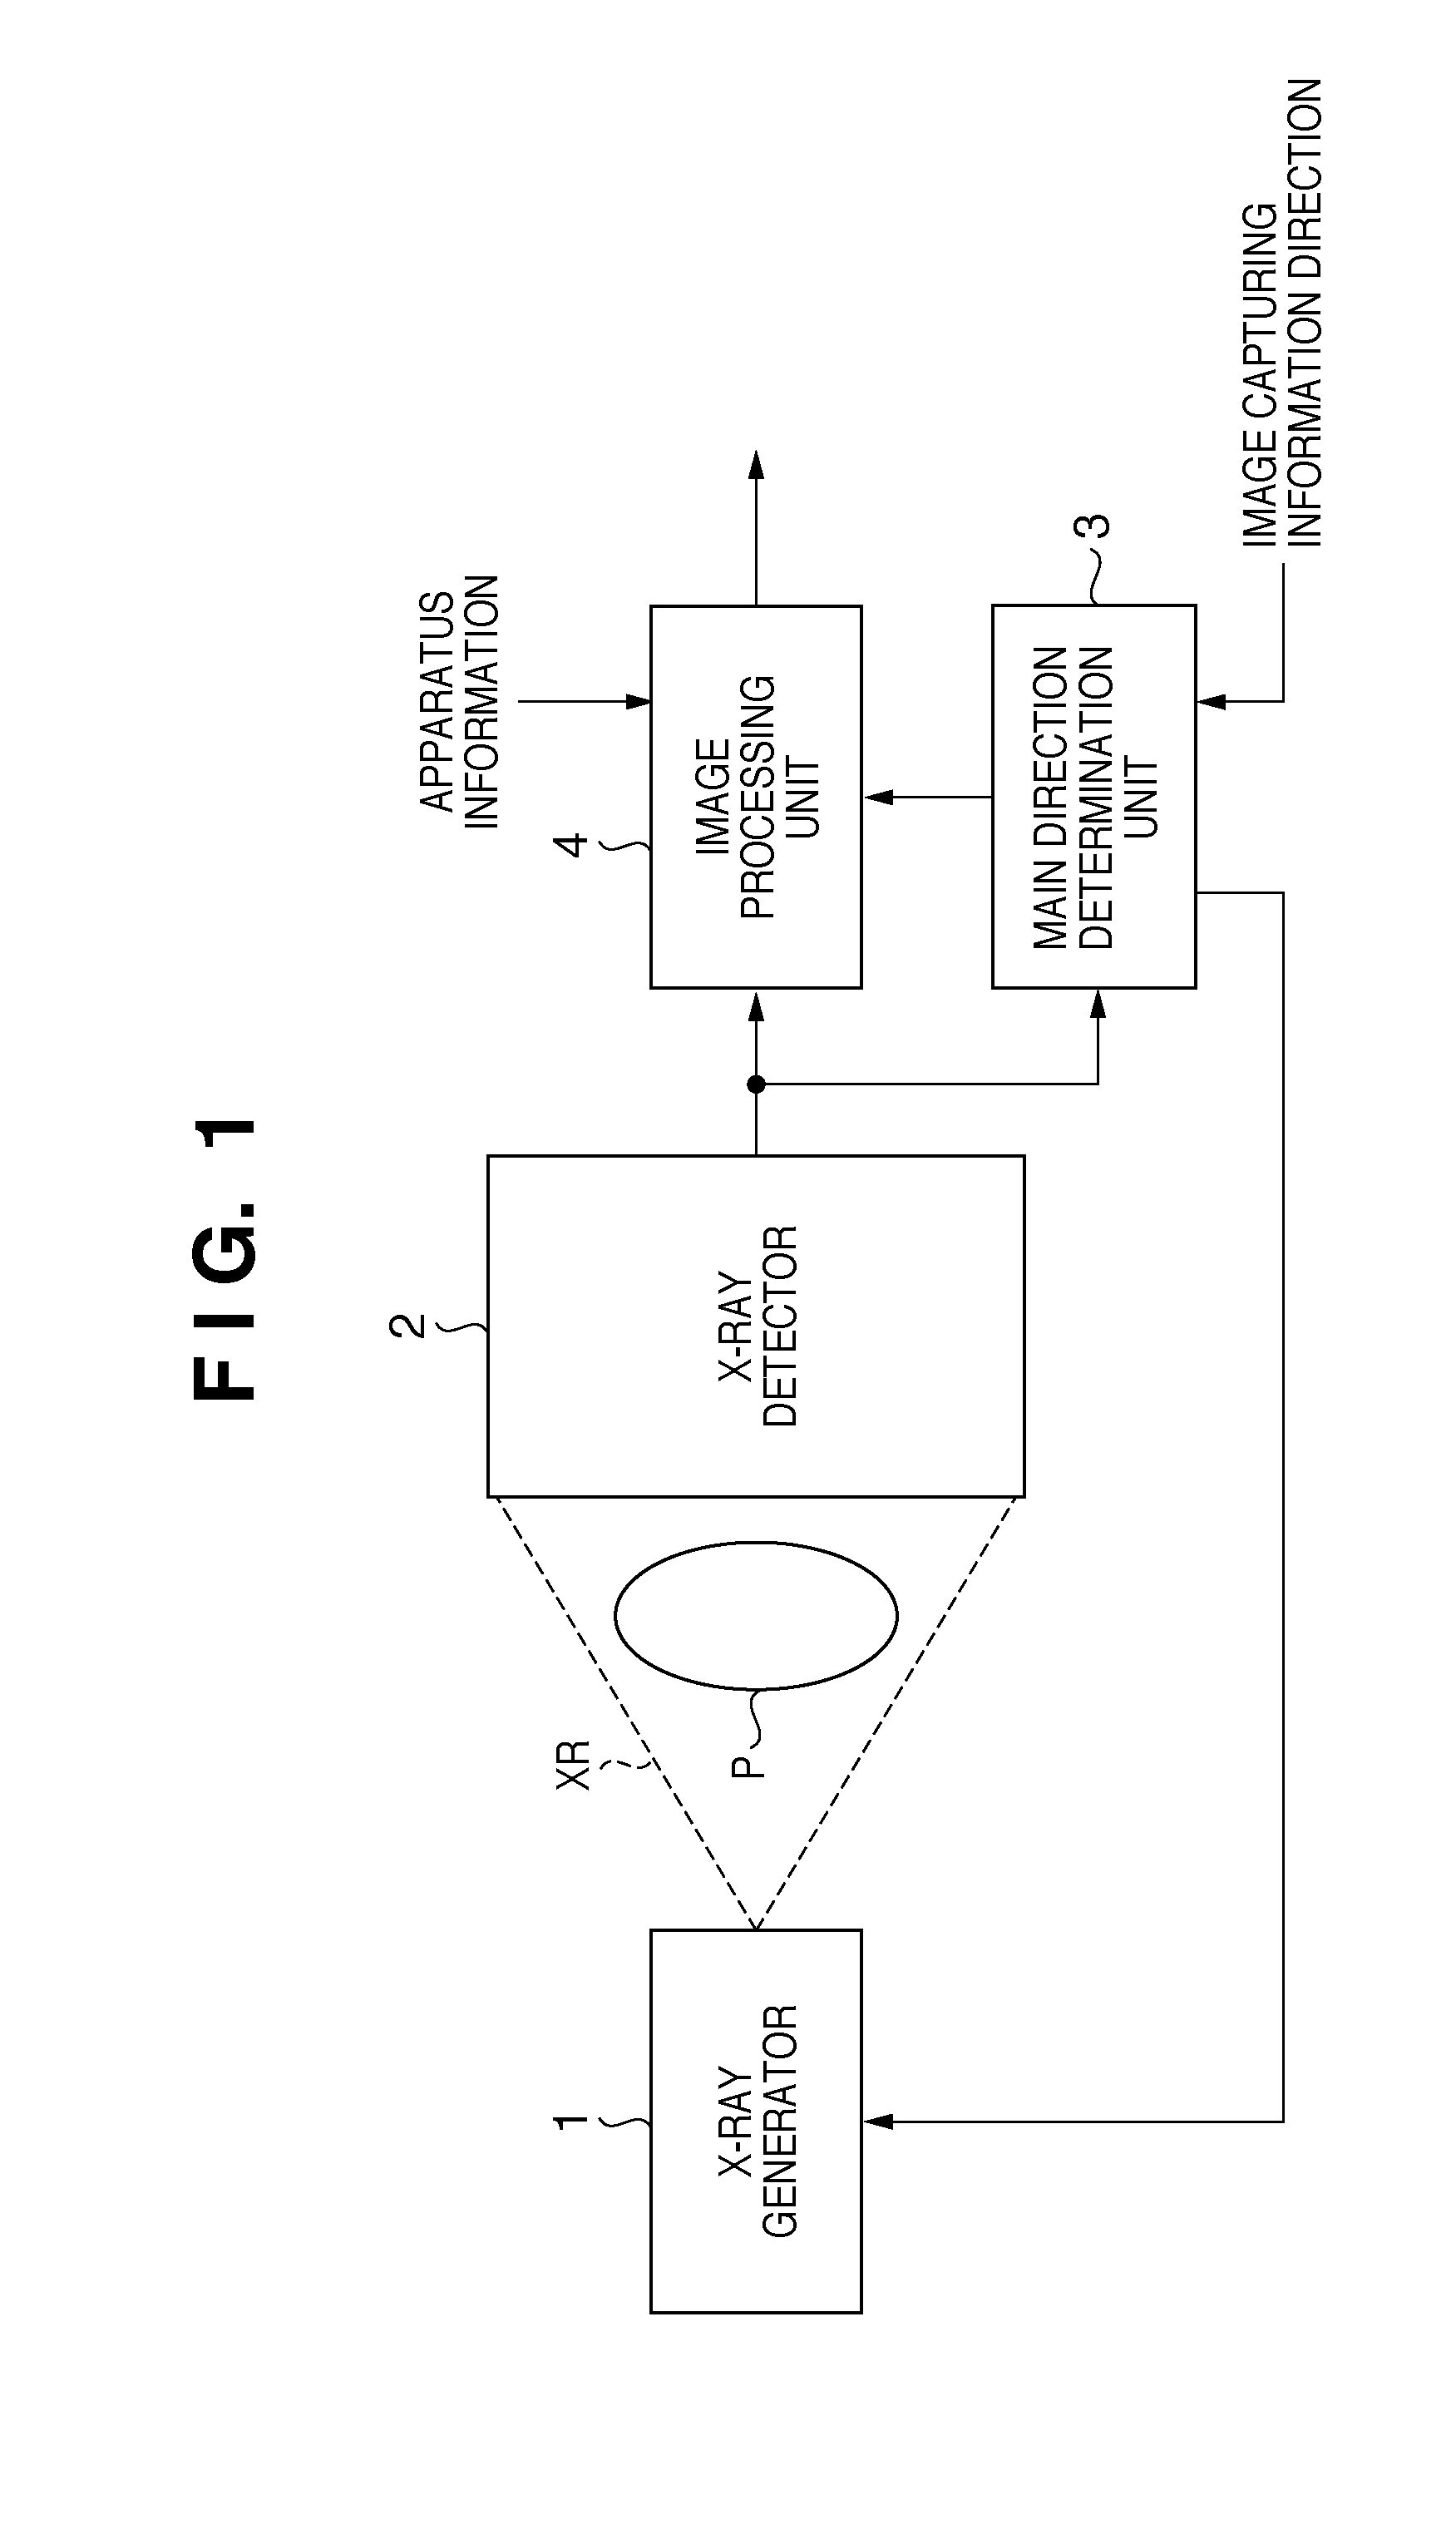 X-ray generator, X-ray imaging apparatus, and control methods therefor